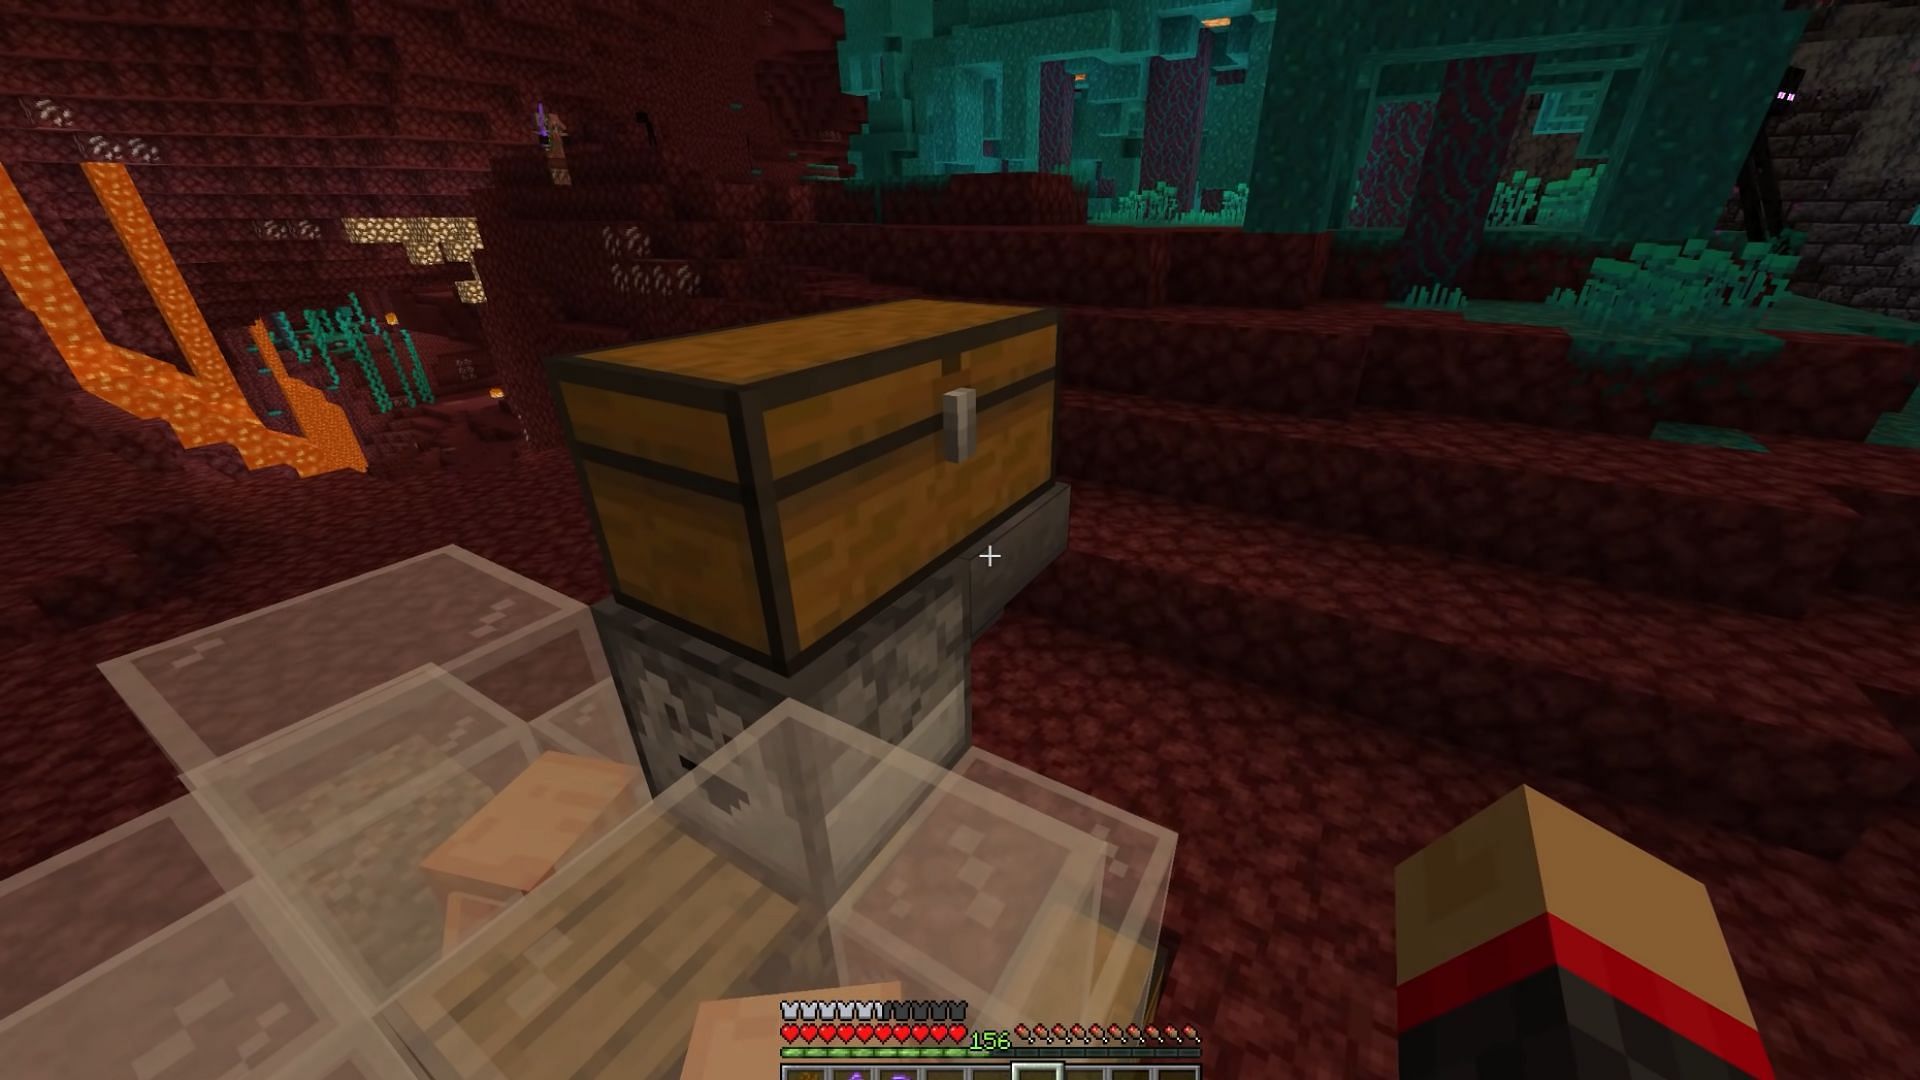 A dropper block must be placed with a hopper and a chest to drop gold ingot for bartering in Minecraft (Image via YouTube/Shulkercraft)